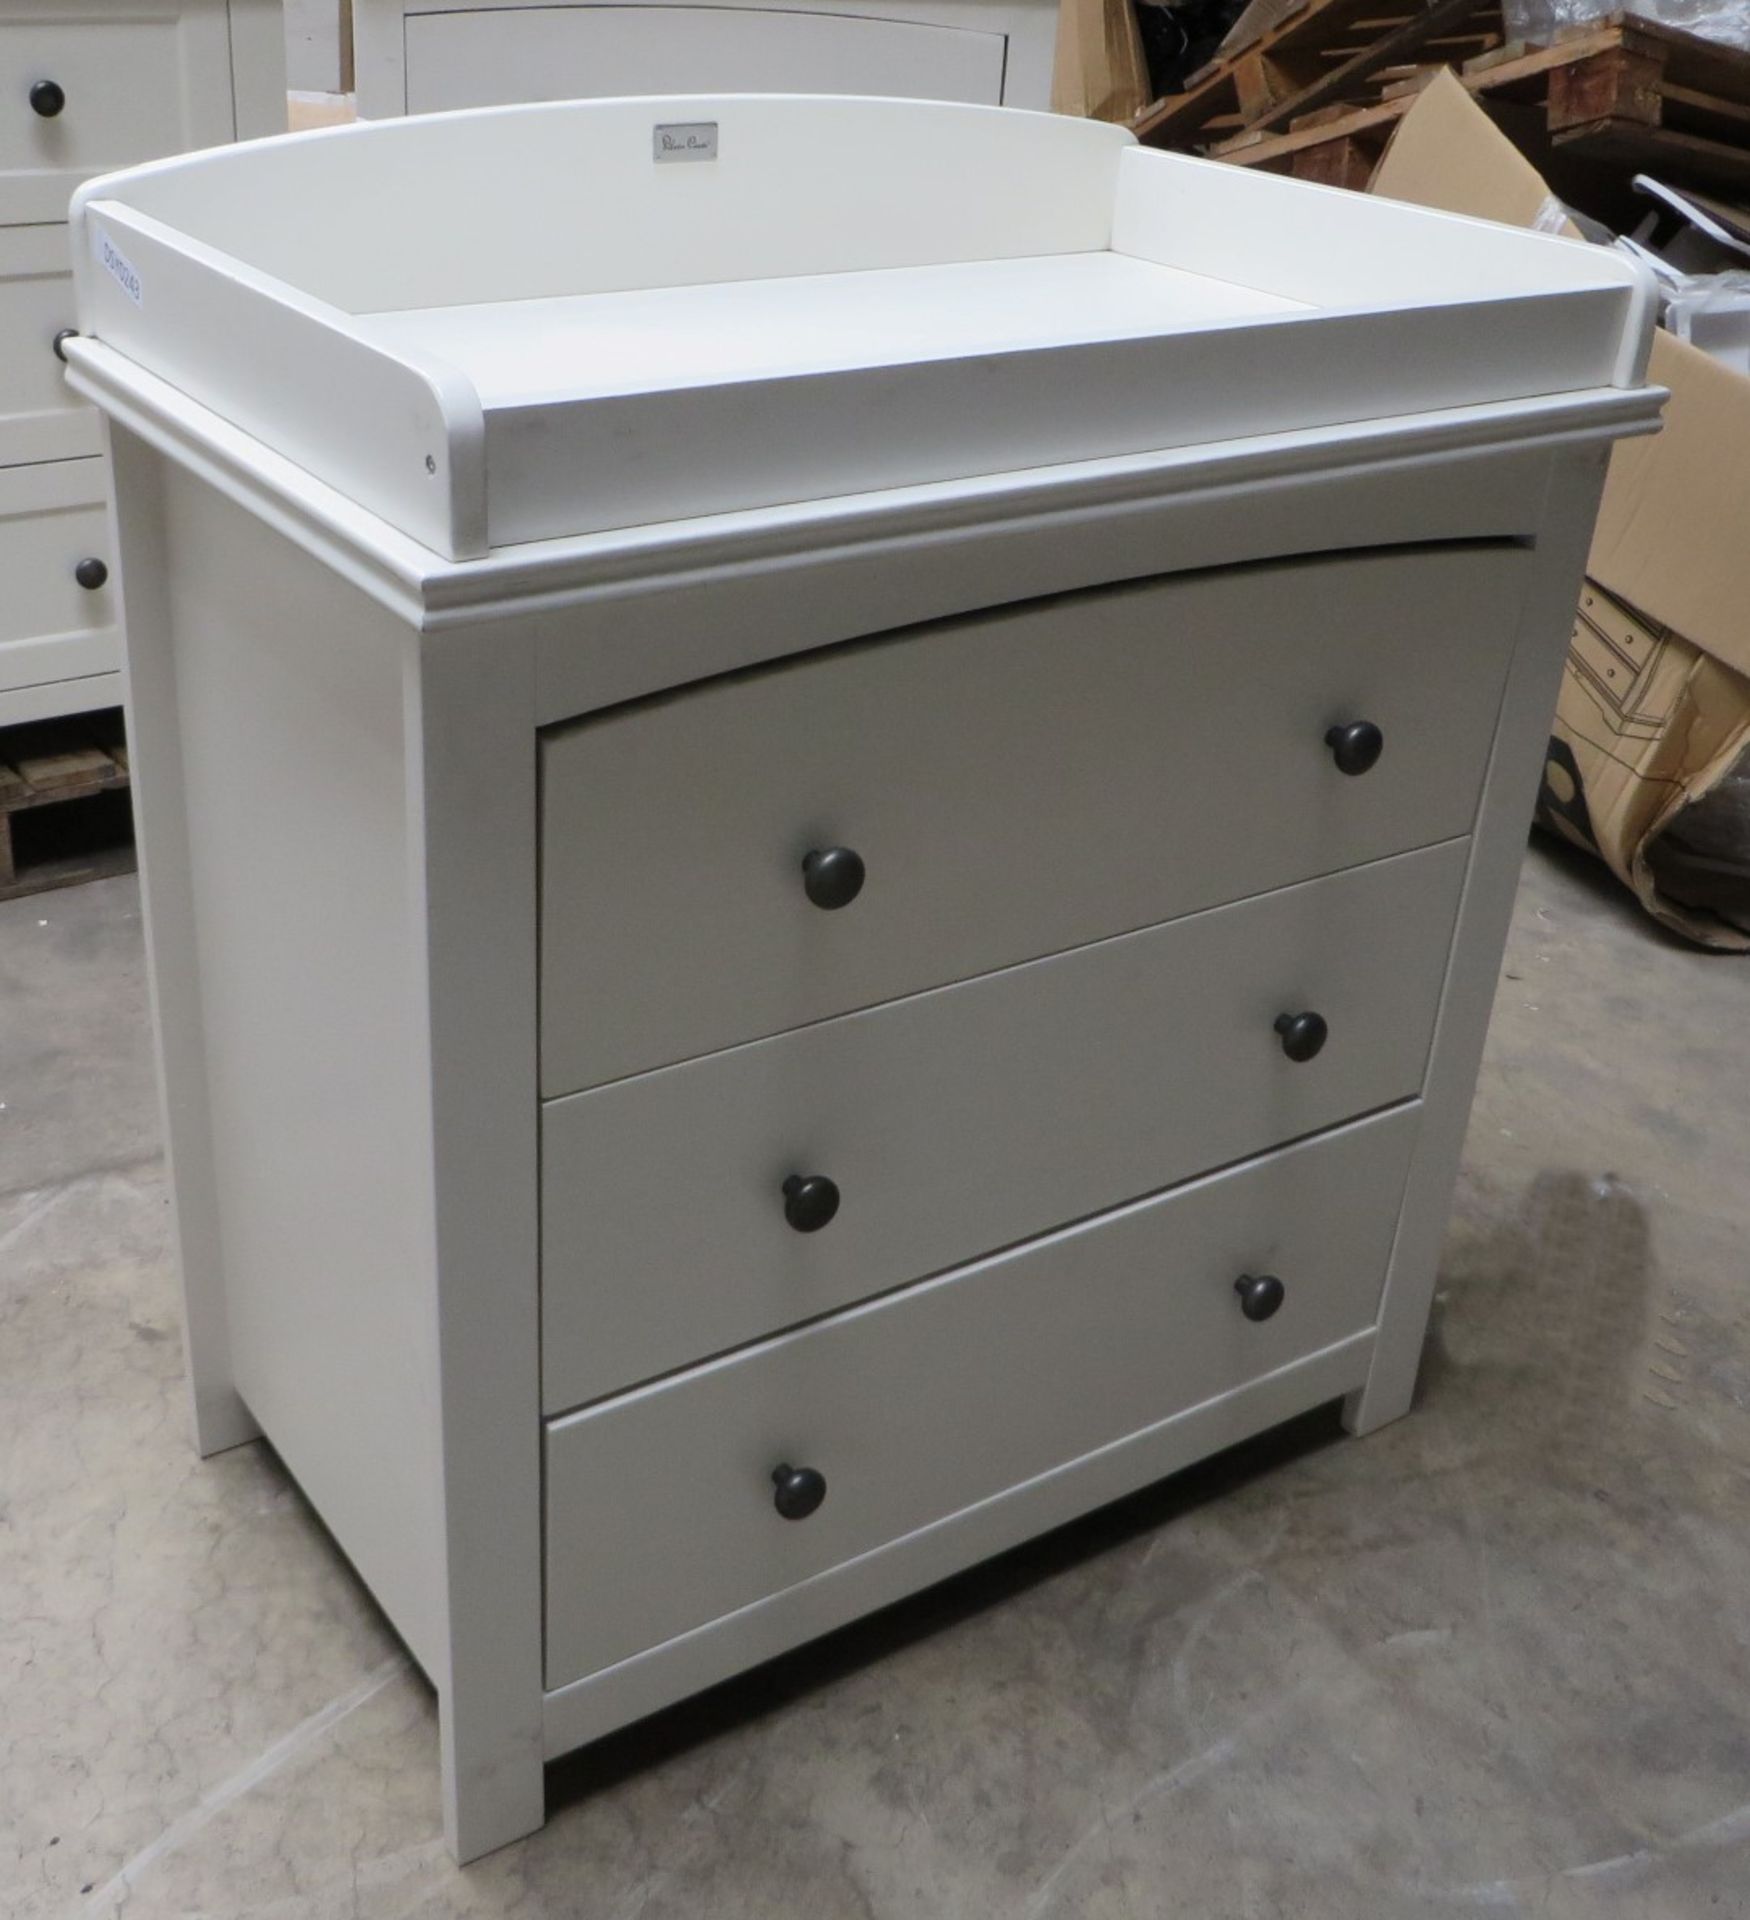 1 x Silver Cross Ashby-Style Combination Changer And Dresser - Nursery Furniture - 88x52x97.5cm - - Image 3 of 19